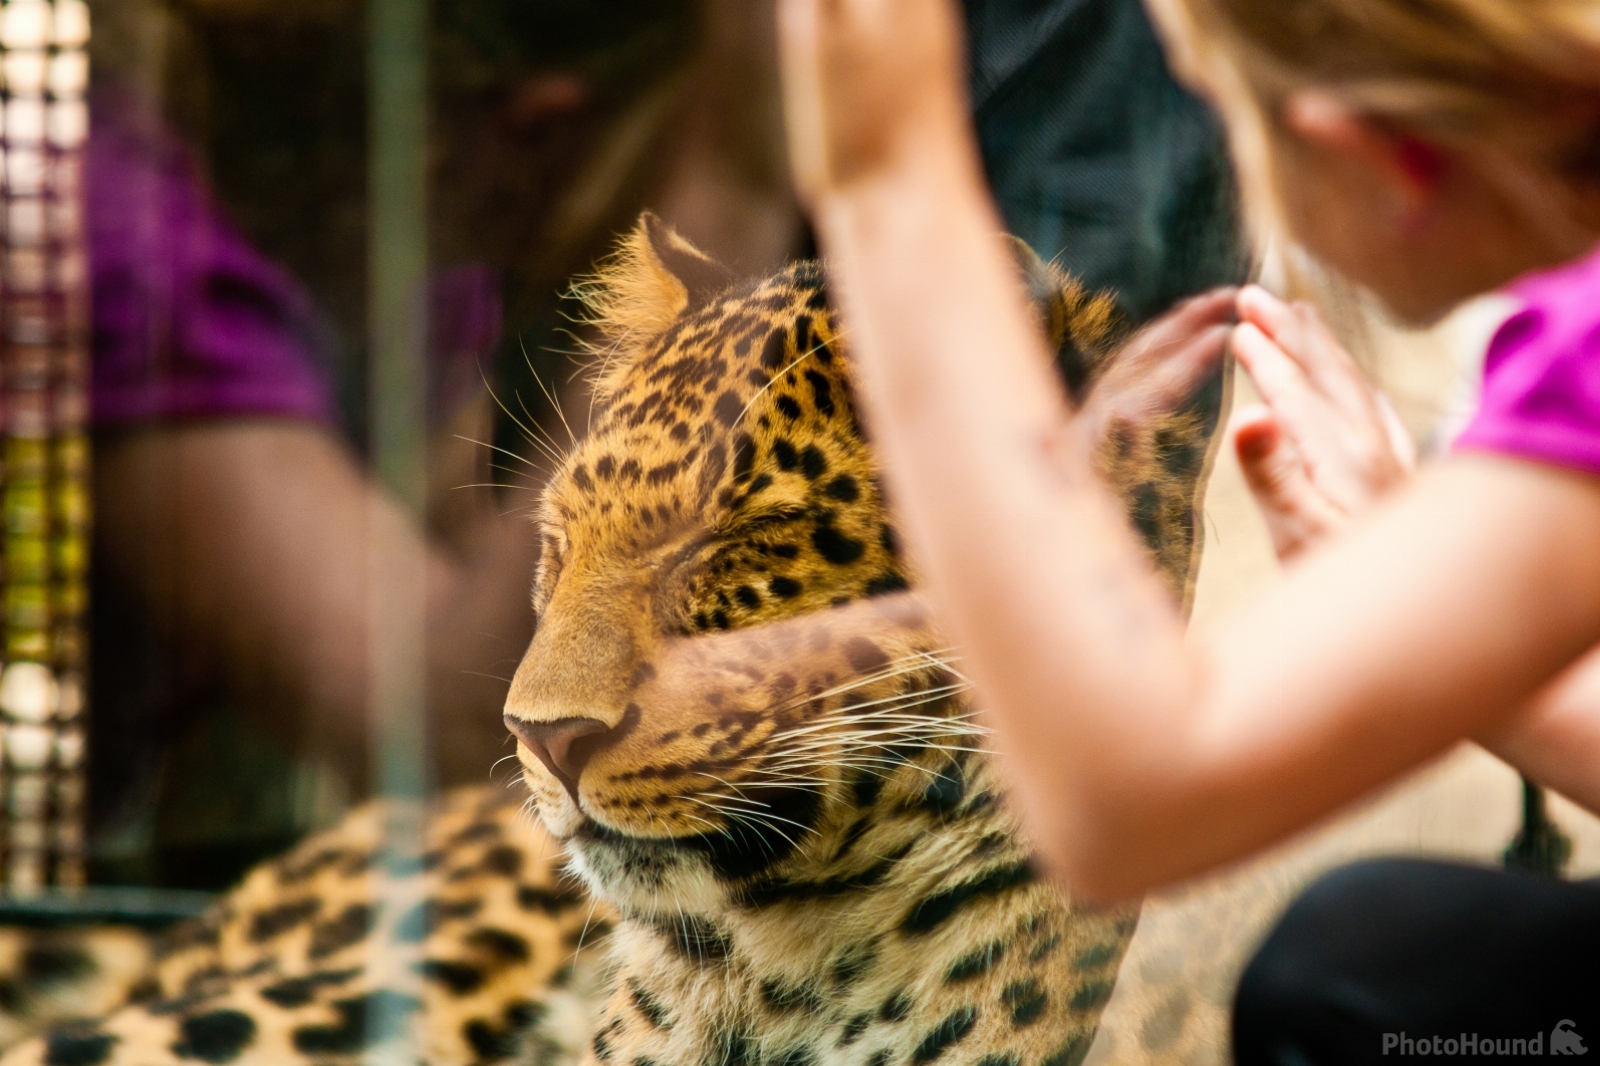 Image of Liberec ZOO by VOJTa Herout